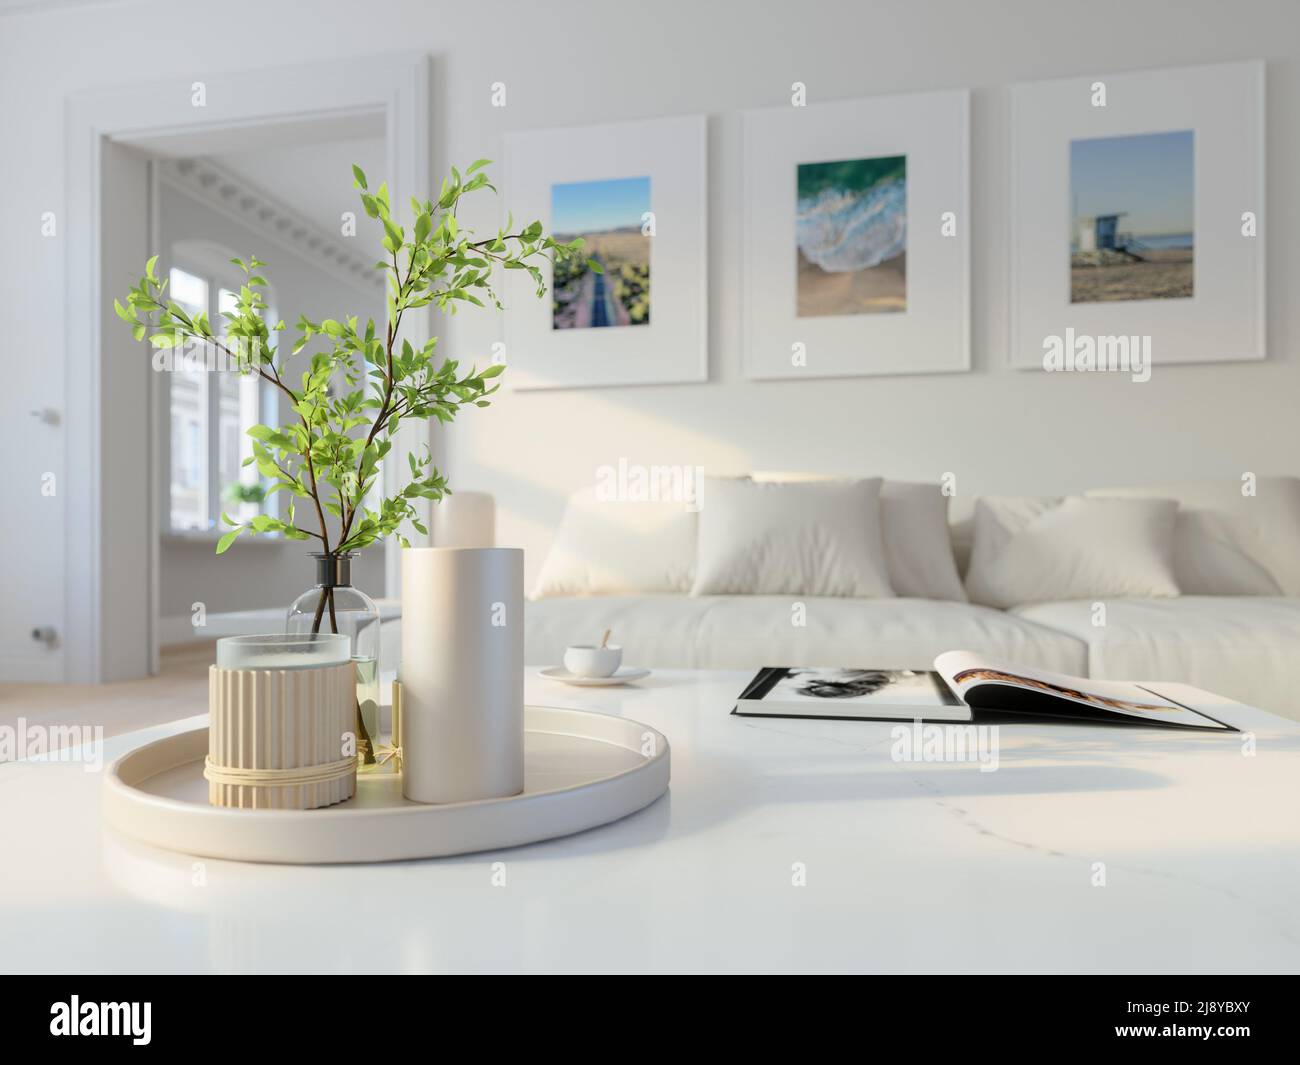 3D illustration. modern scandinavian living room with wall images. Stock Photo